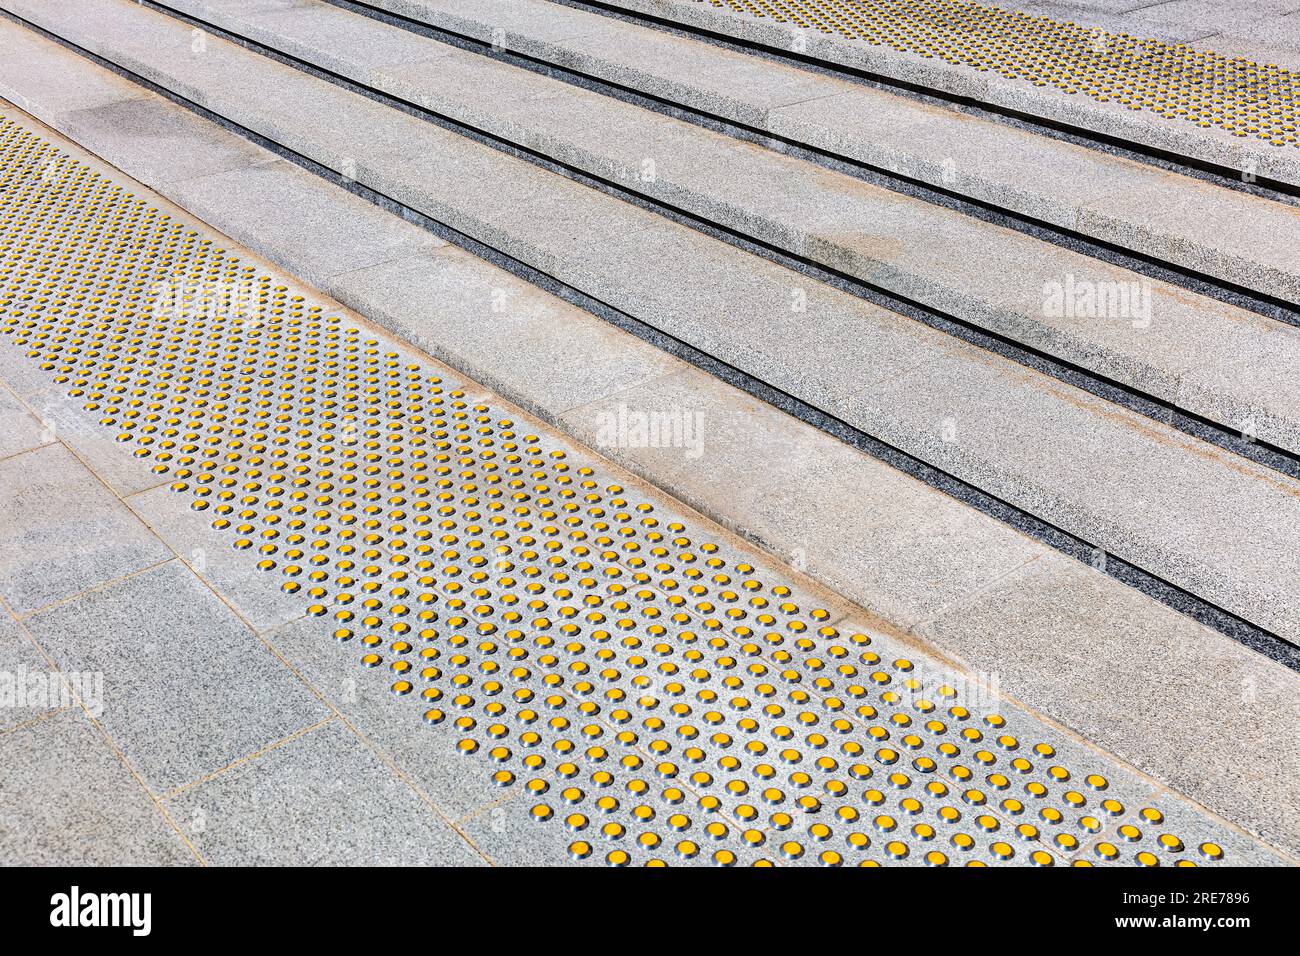 yellow limiter markings on stairs for visually impaired people Stock Photo